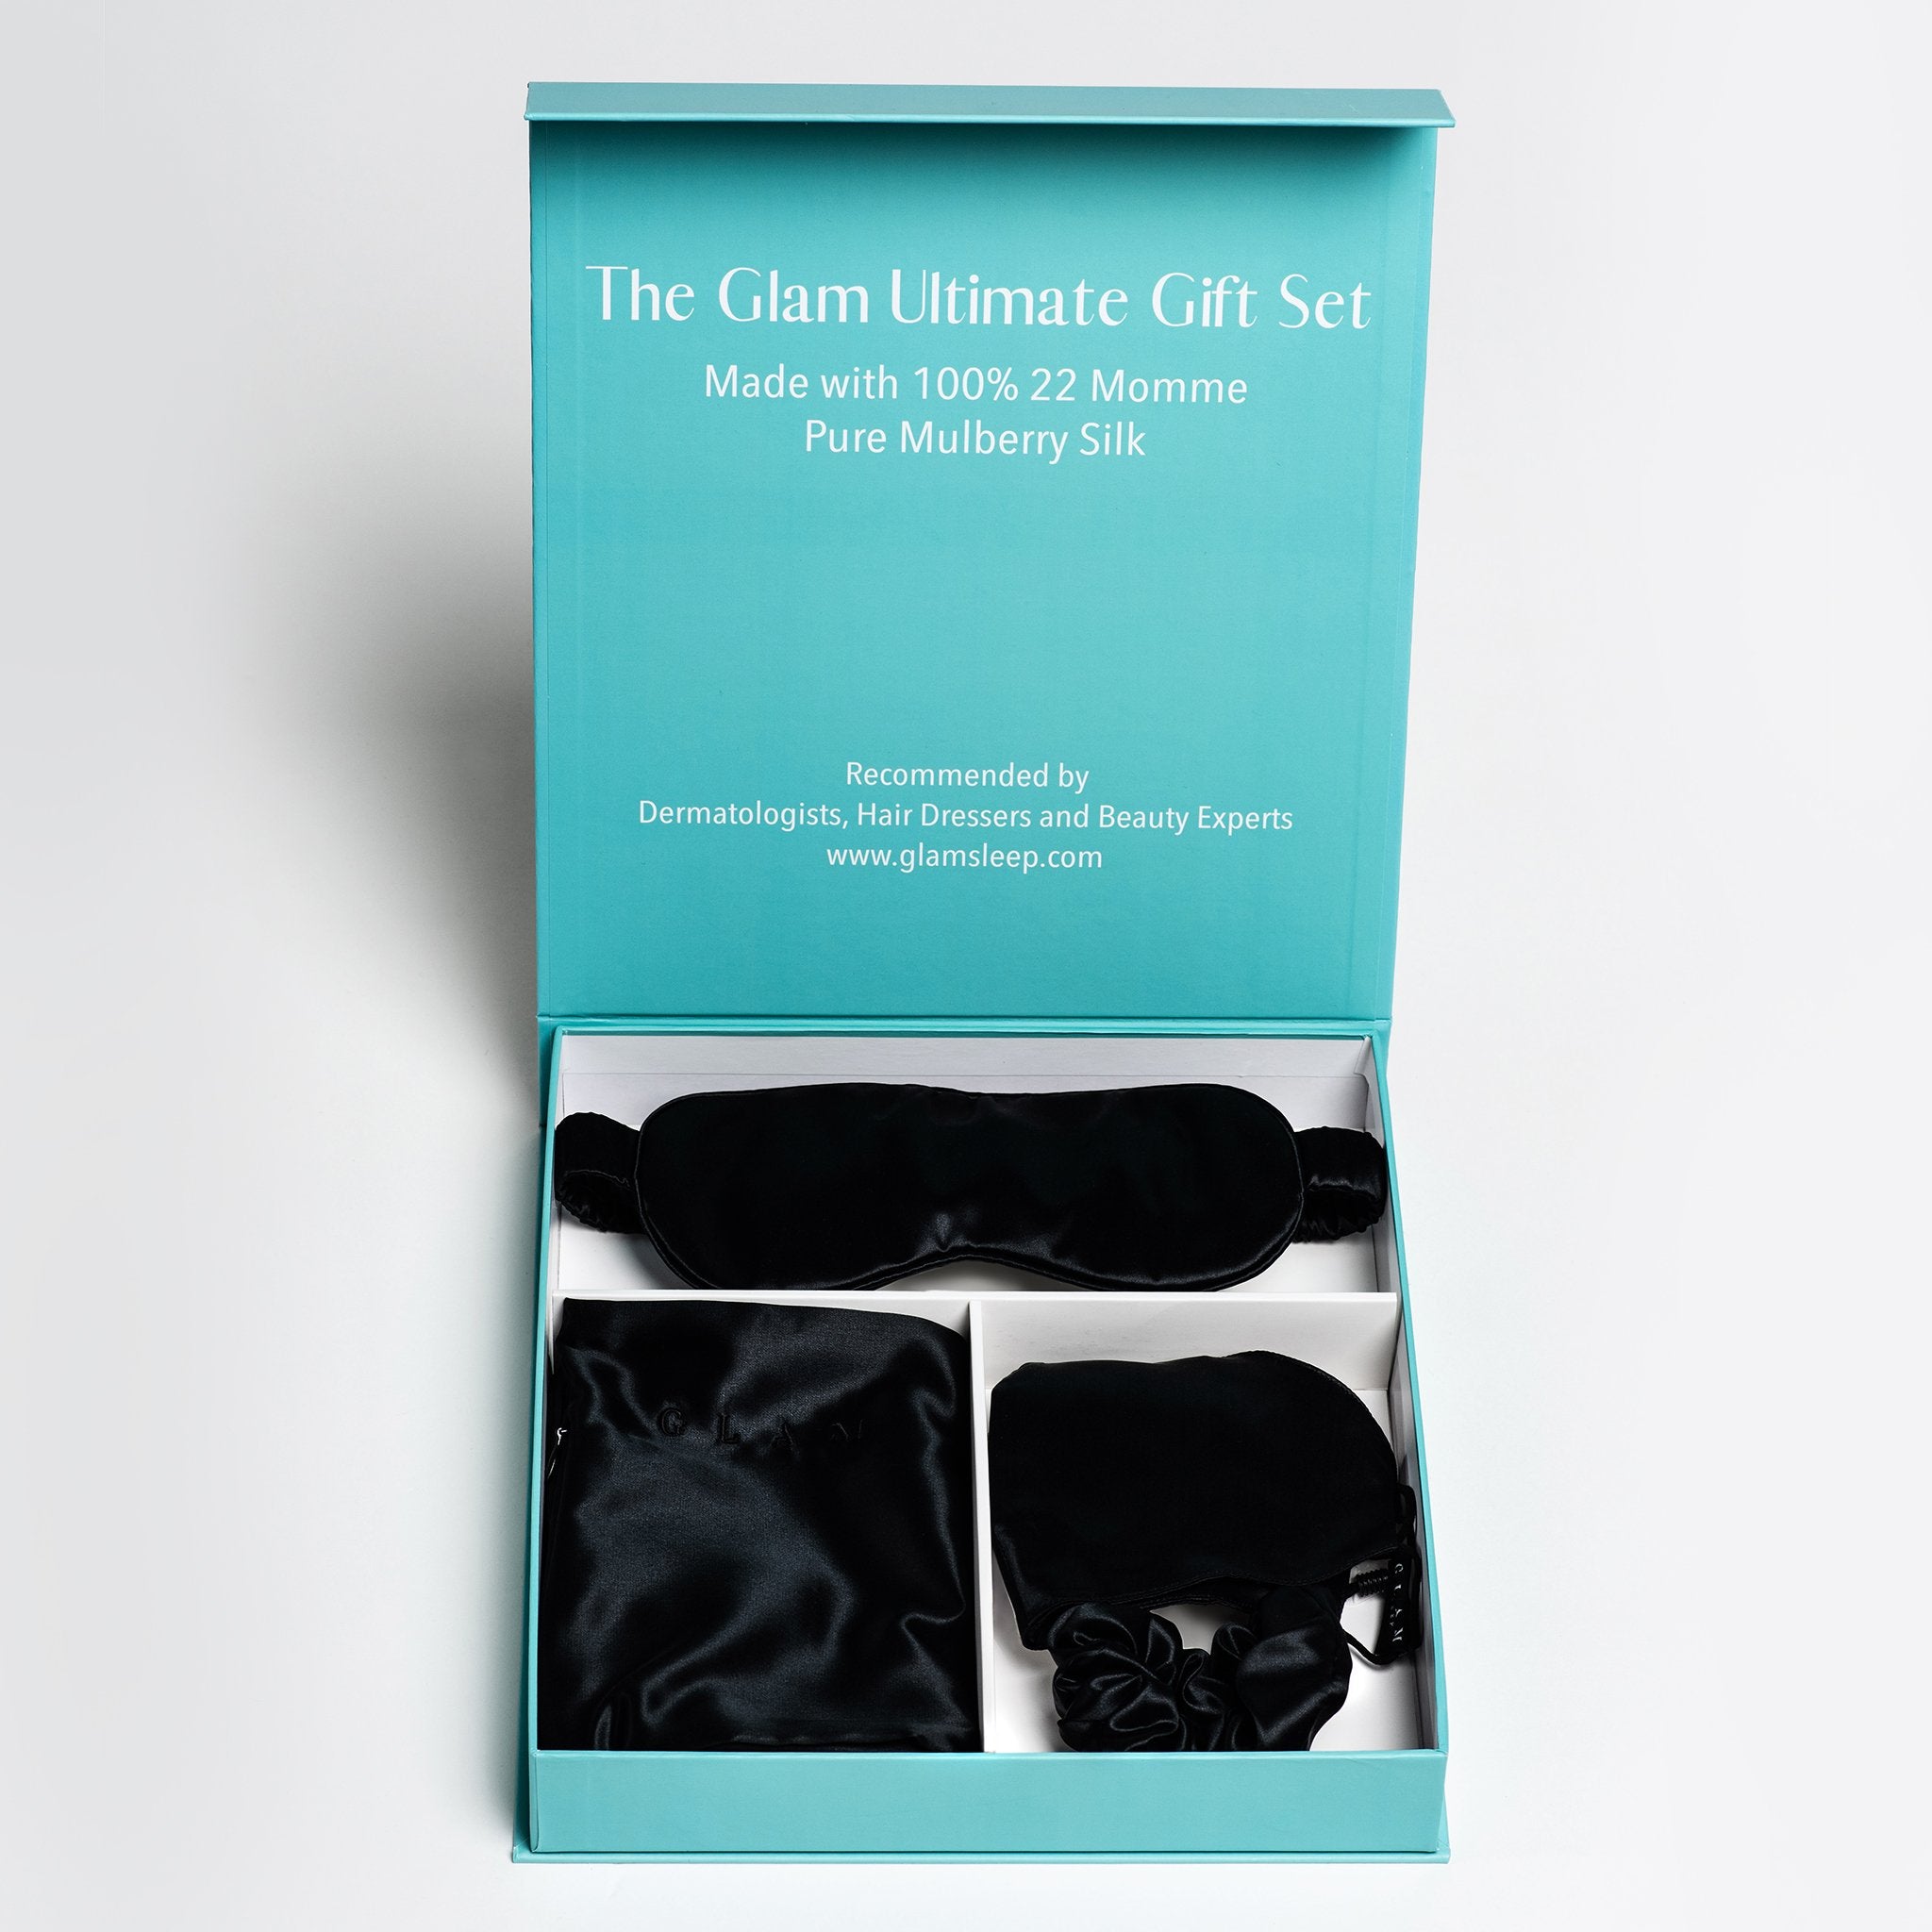 The Glam Silk Ultimate Gift Set